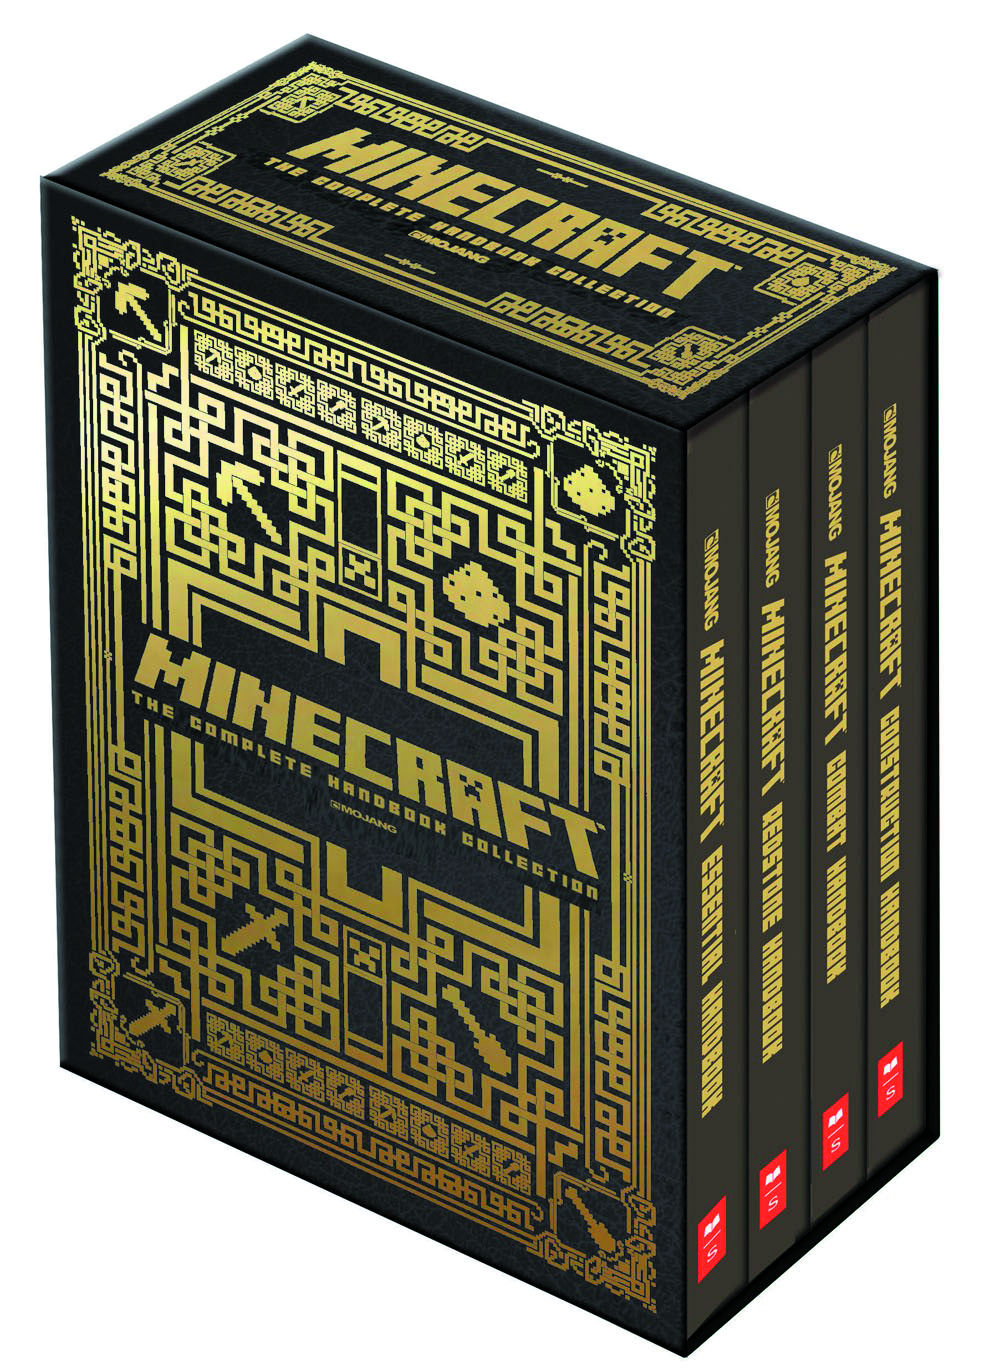 AUG142824 MINECRAFT OFFICIAL MOJANG COMPLETE HANDBOOK COLL Previews